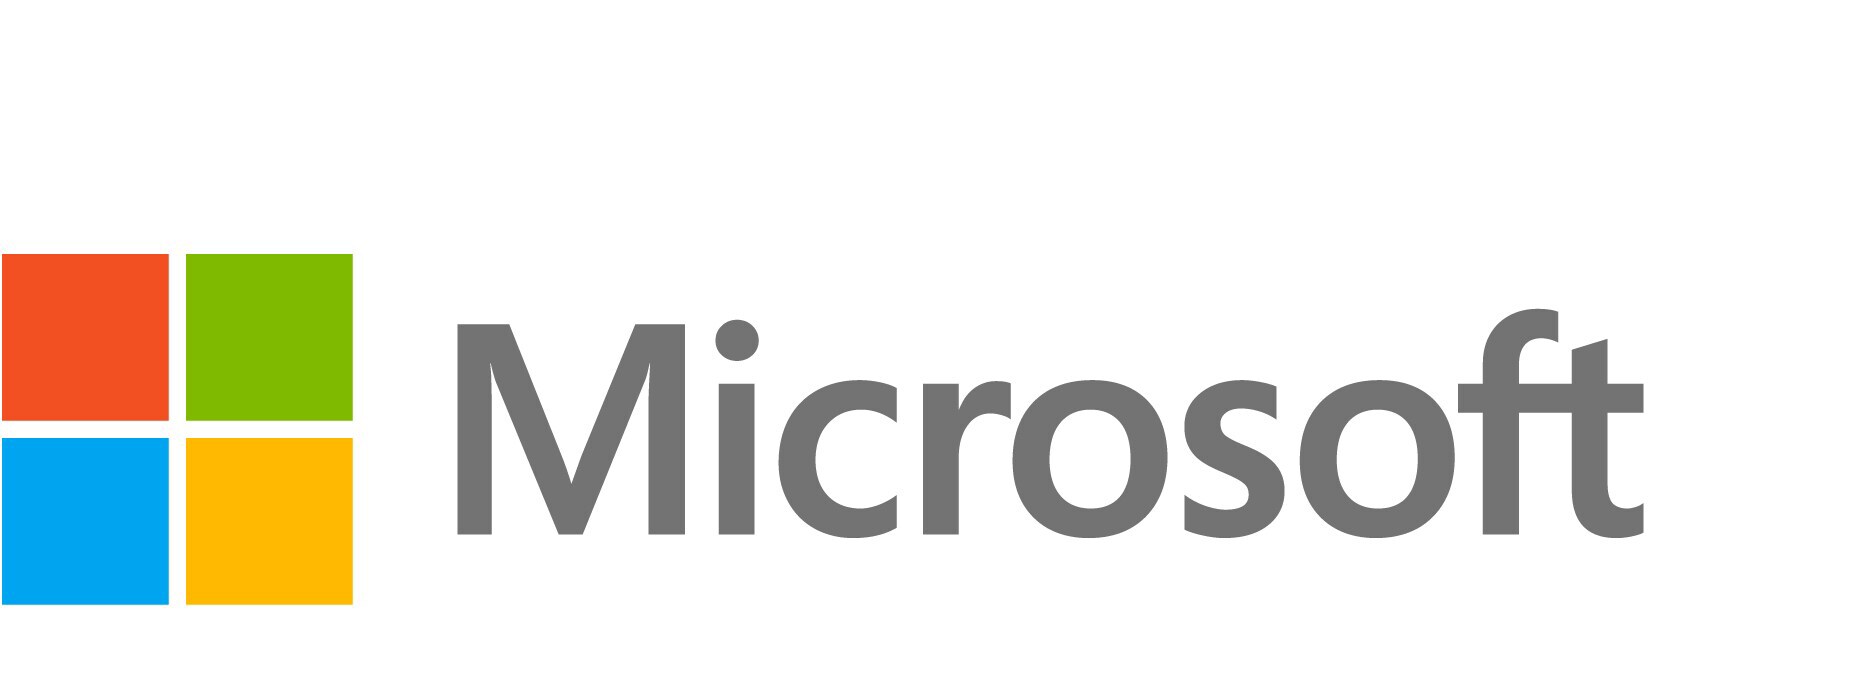 Microsoft 3 Yr Extended Hardware Service Protection Plan-Surface Type Cover